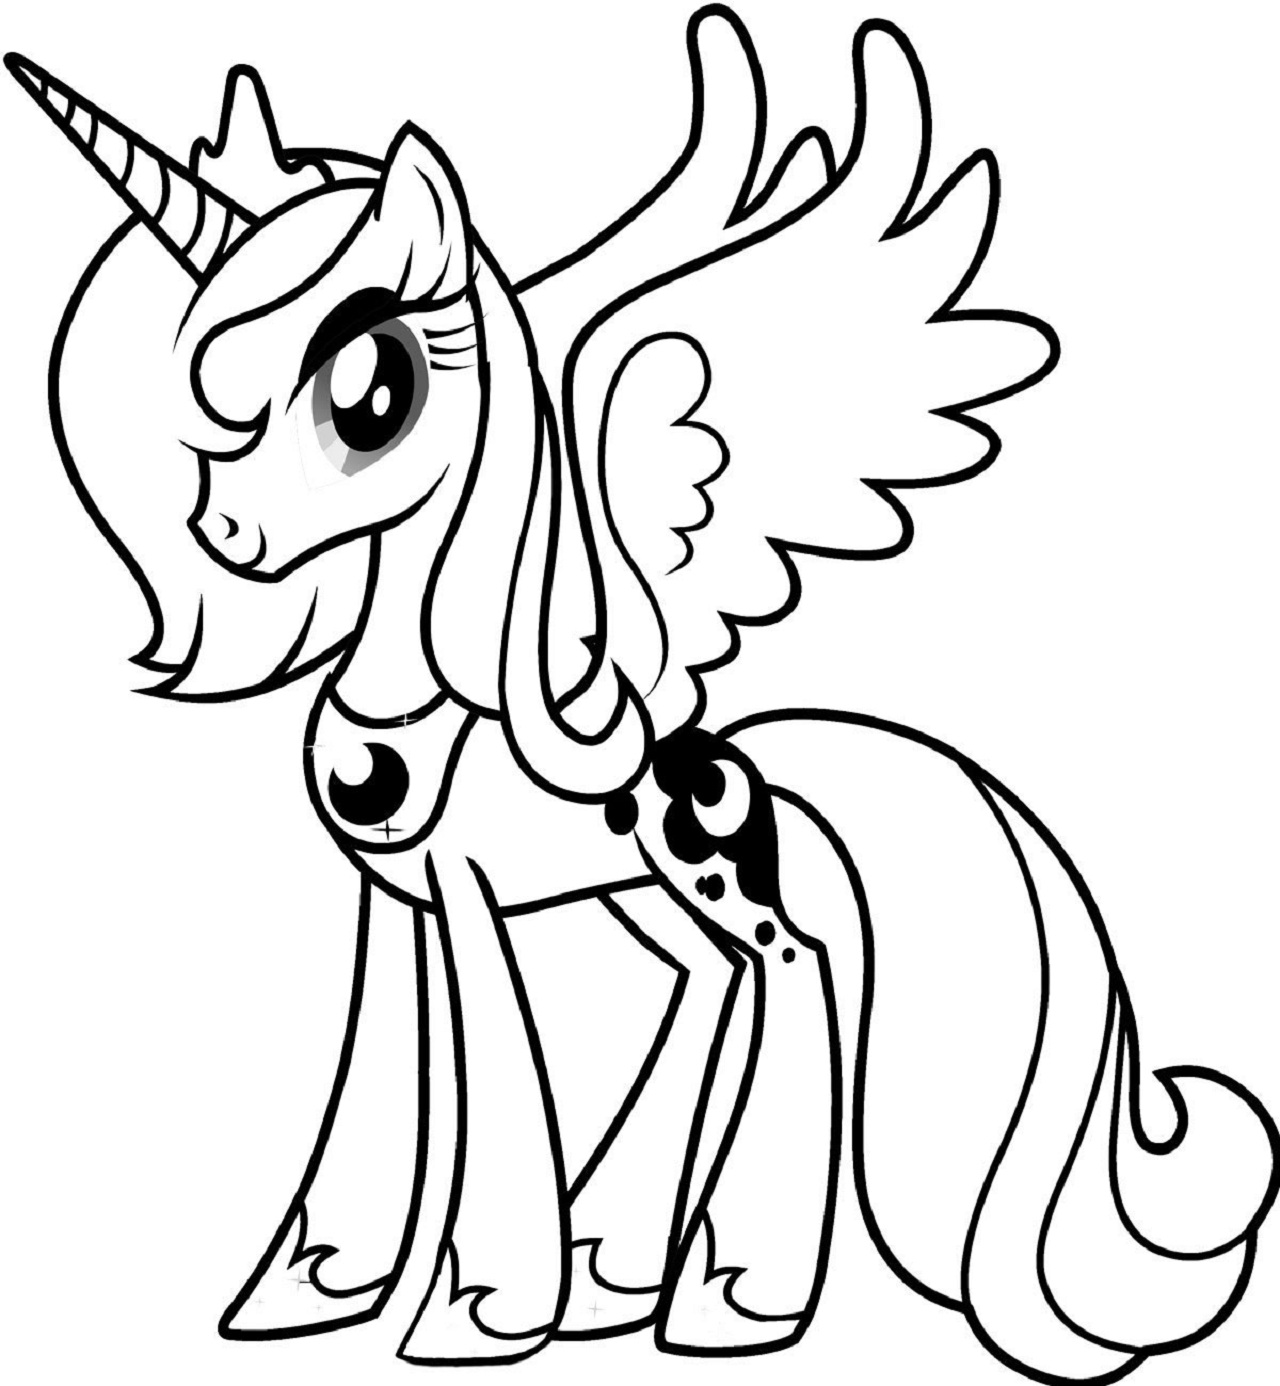 my-little-pony-coloring-pages-my-little-pony-coloring-horse-coloring